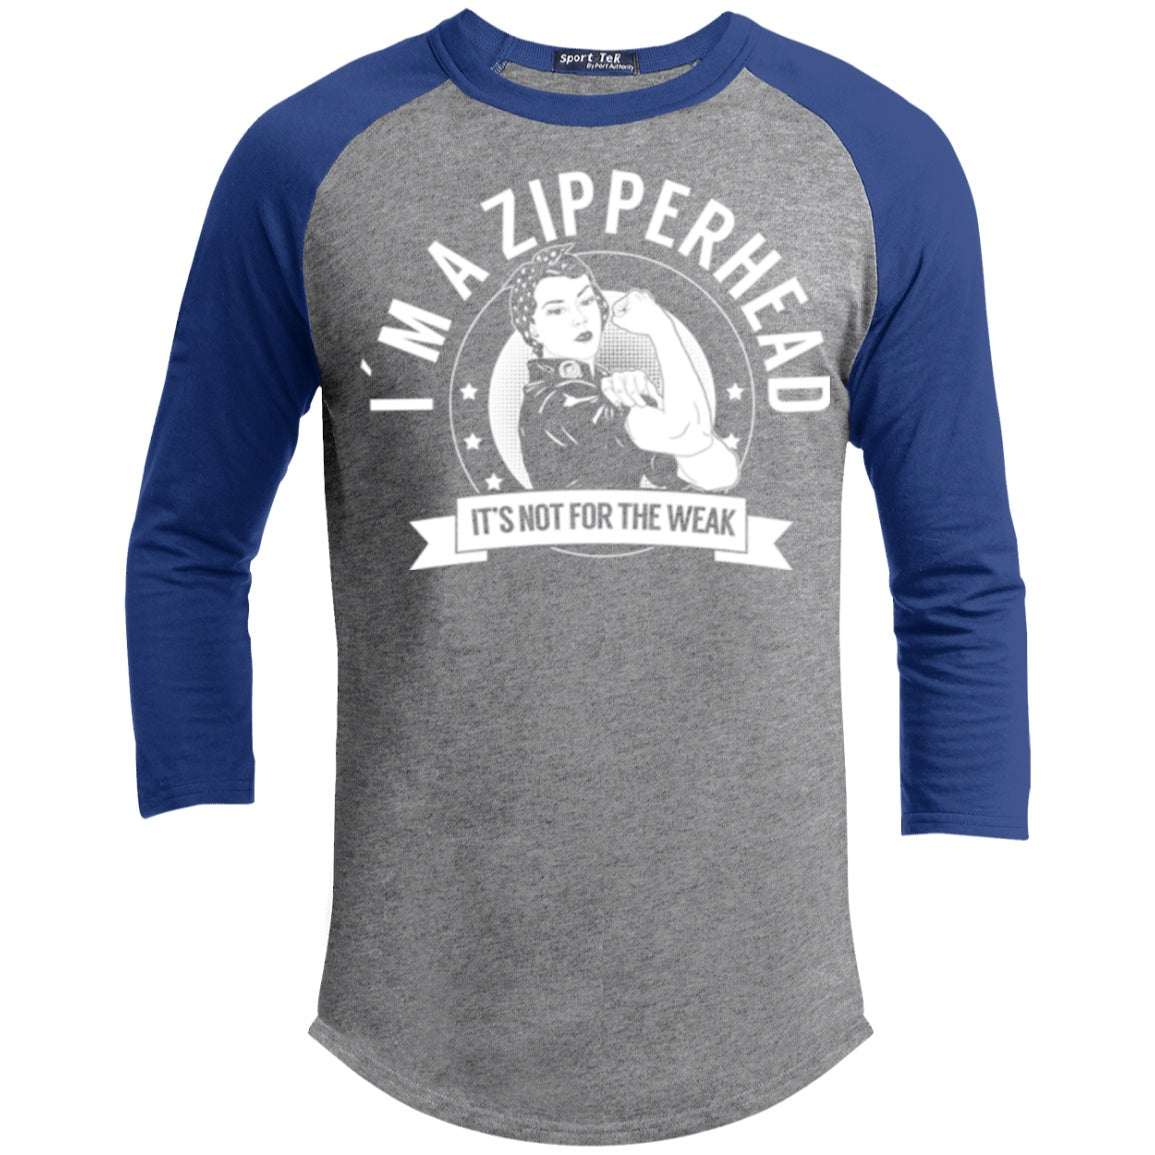 Zipperhead Not For The Weak Baseball Shirt - The Unchargeables